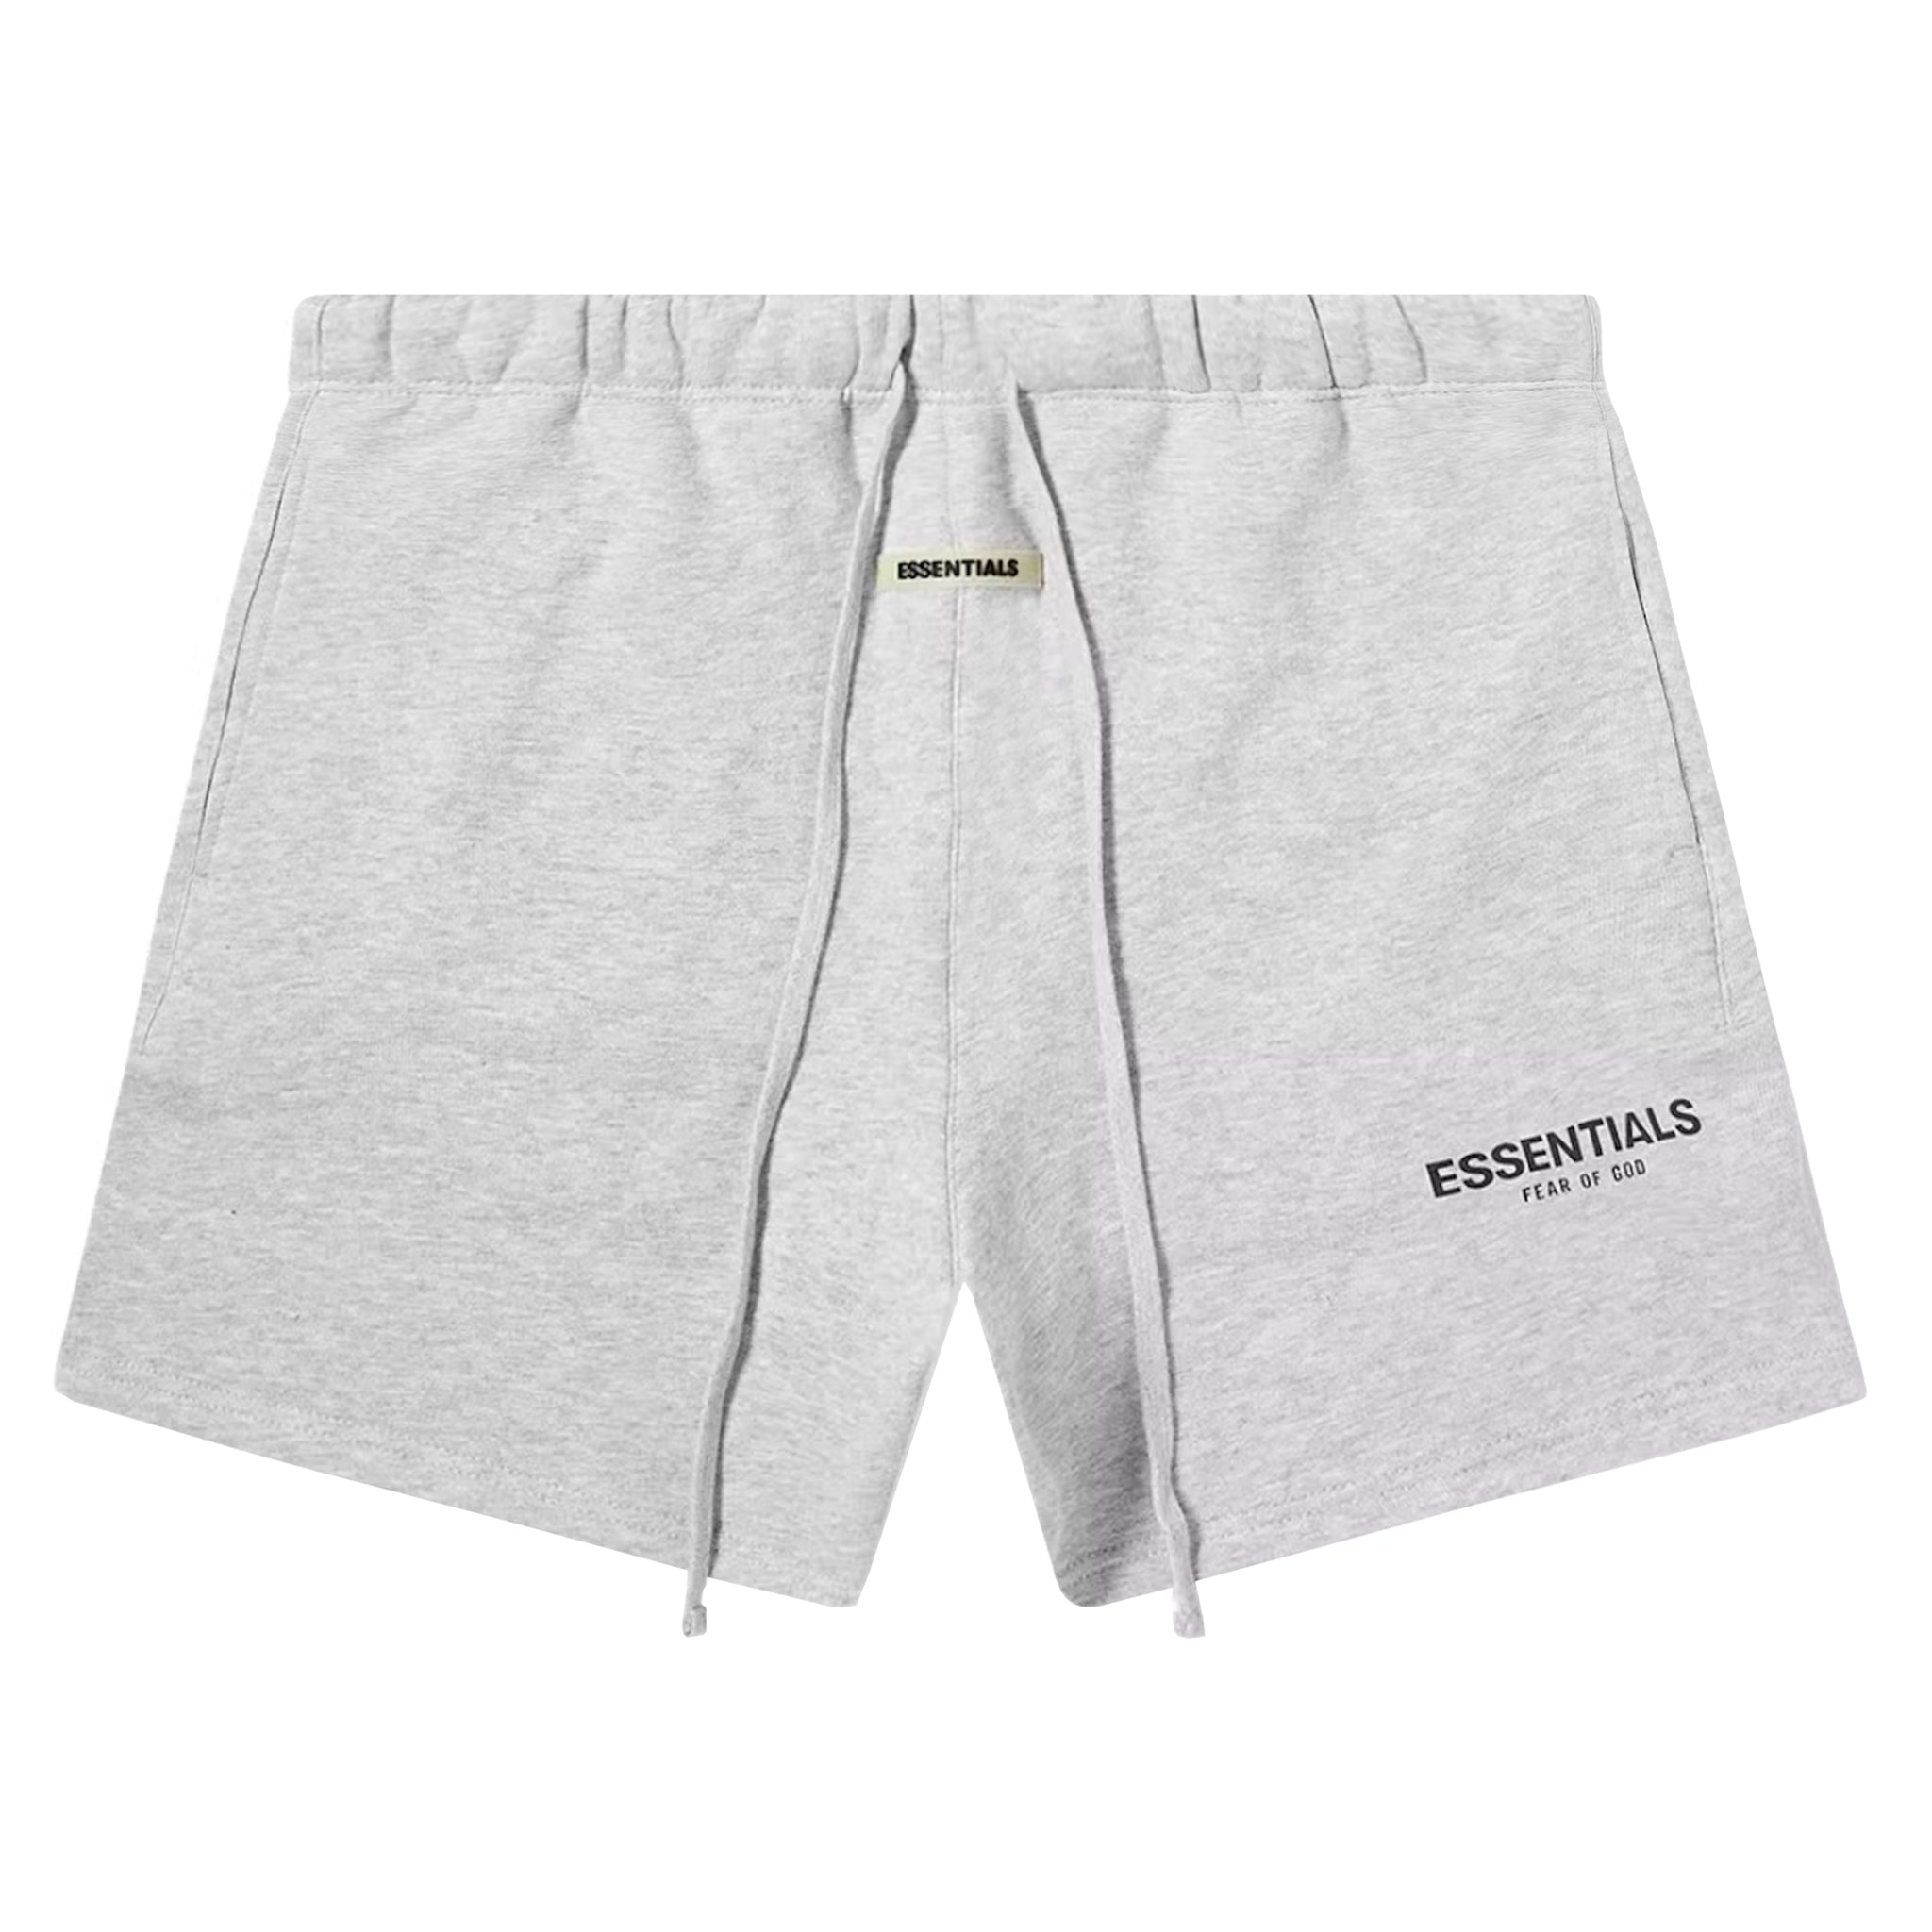 Image of Fear Of God Essentials Heather Grey Reflective Shorts